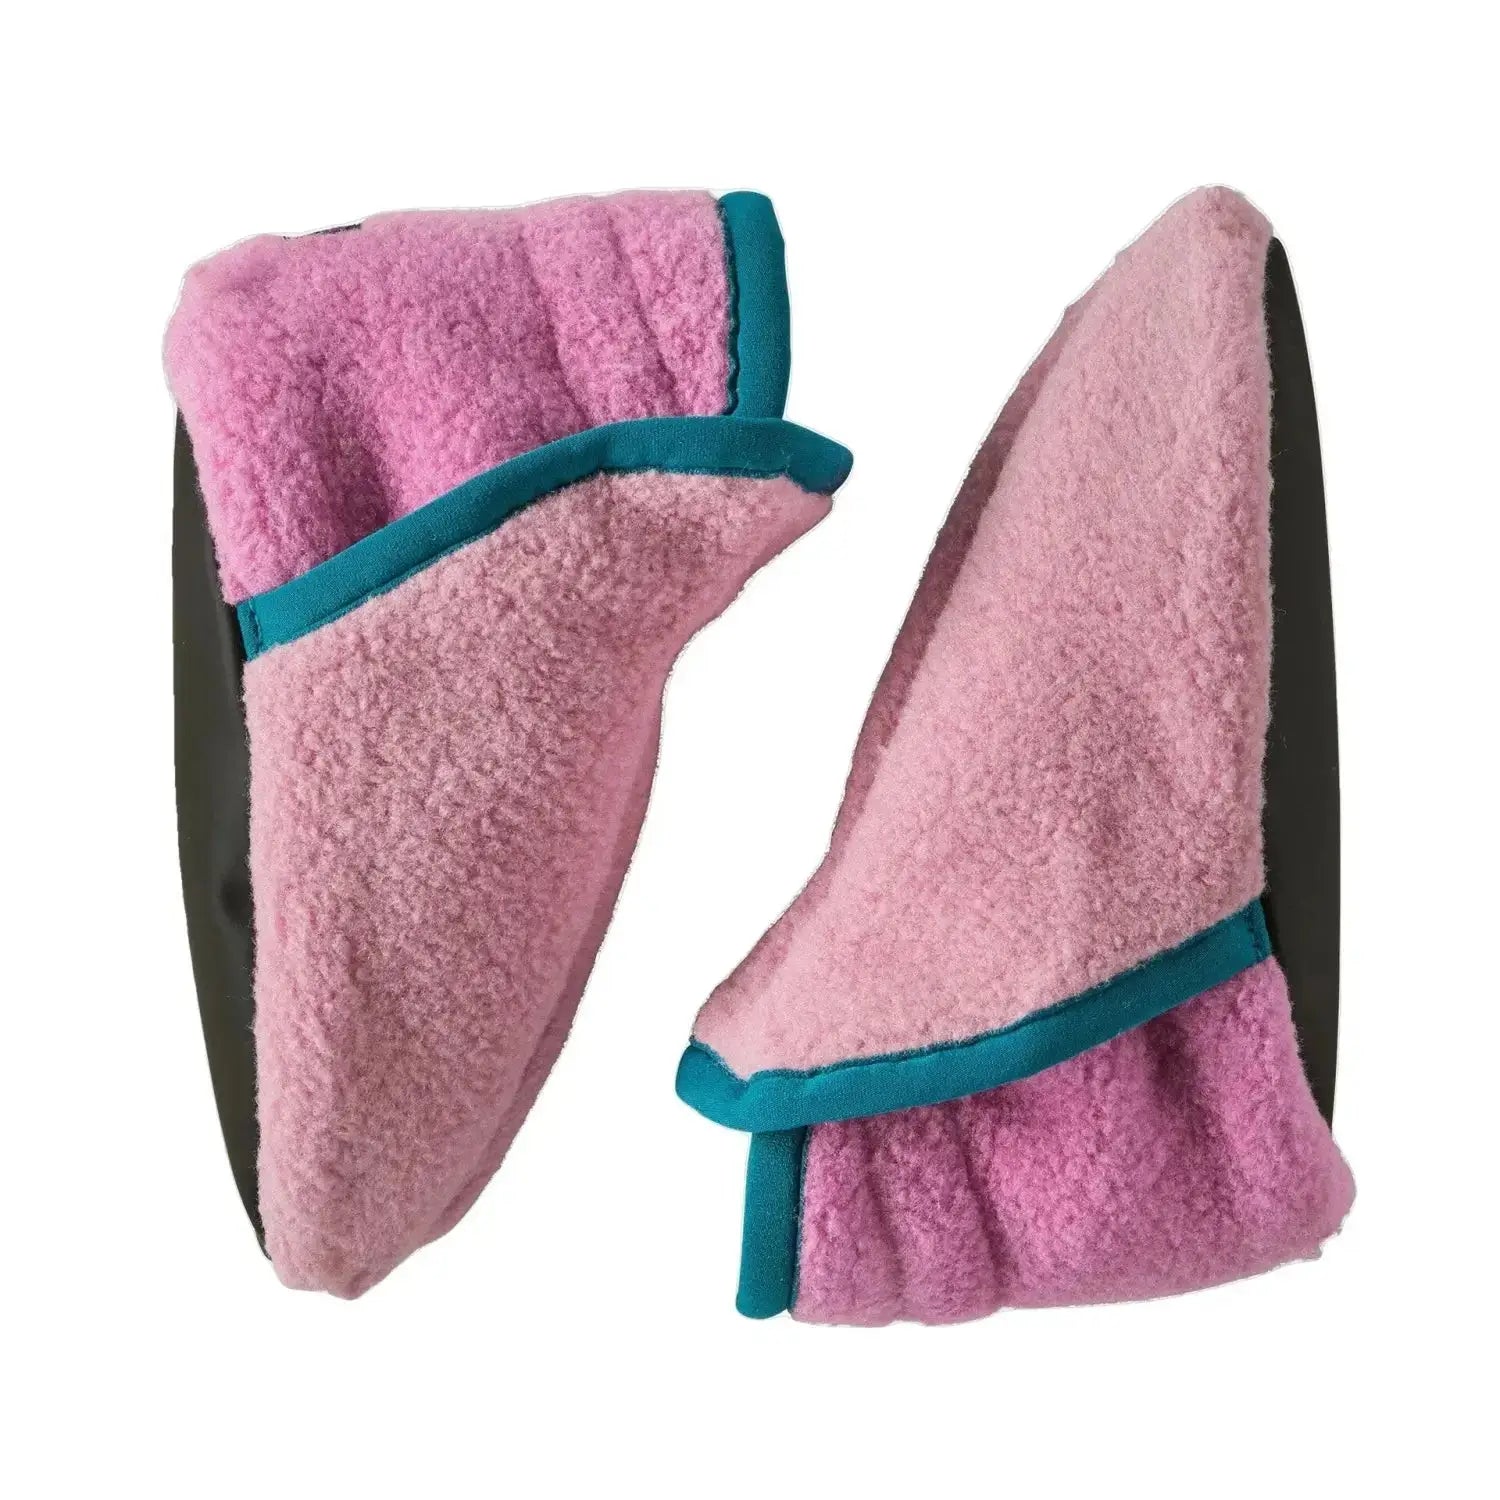 Patagonia Baby Synchilla™ Fleece Booties shown in Marble Pink color option.